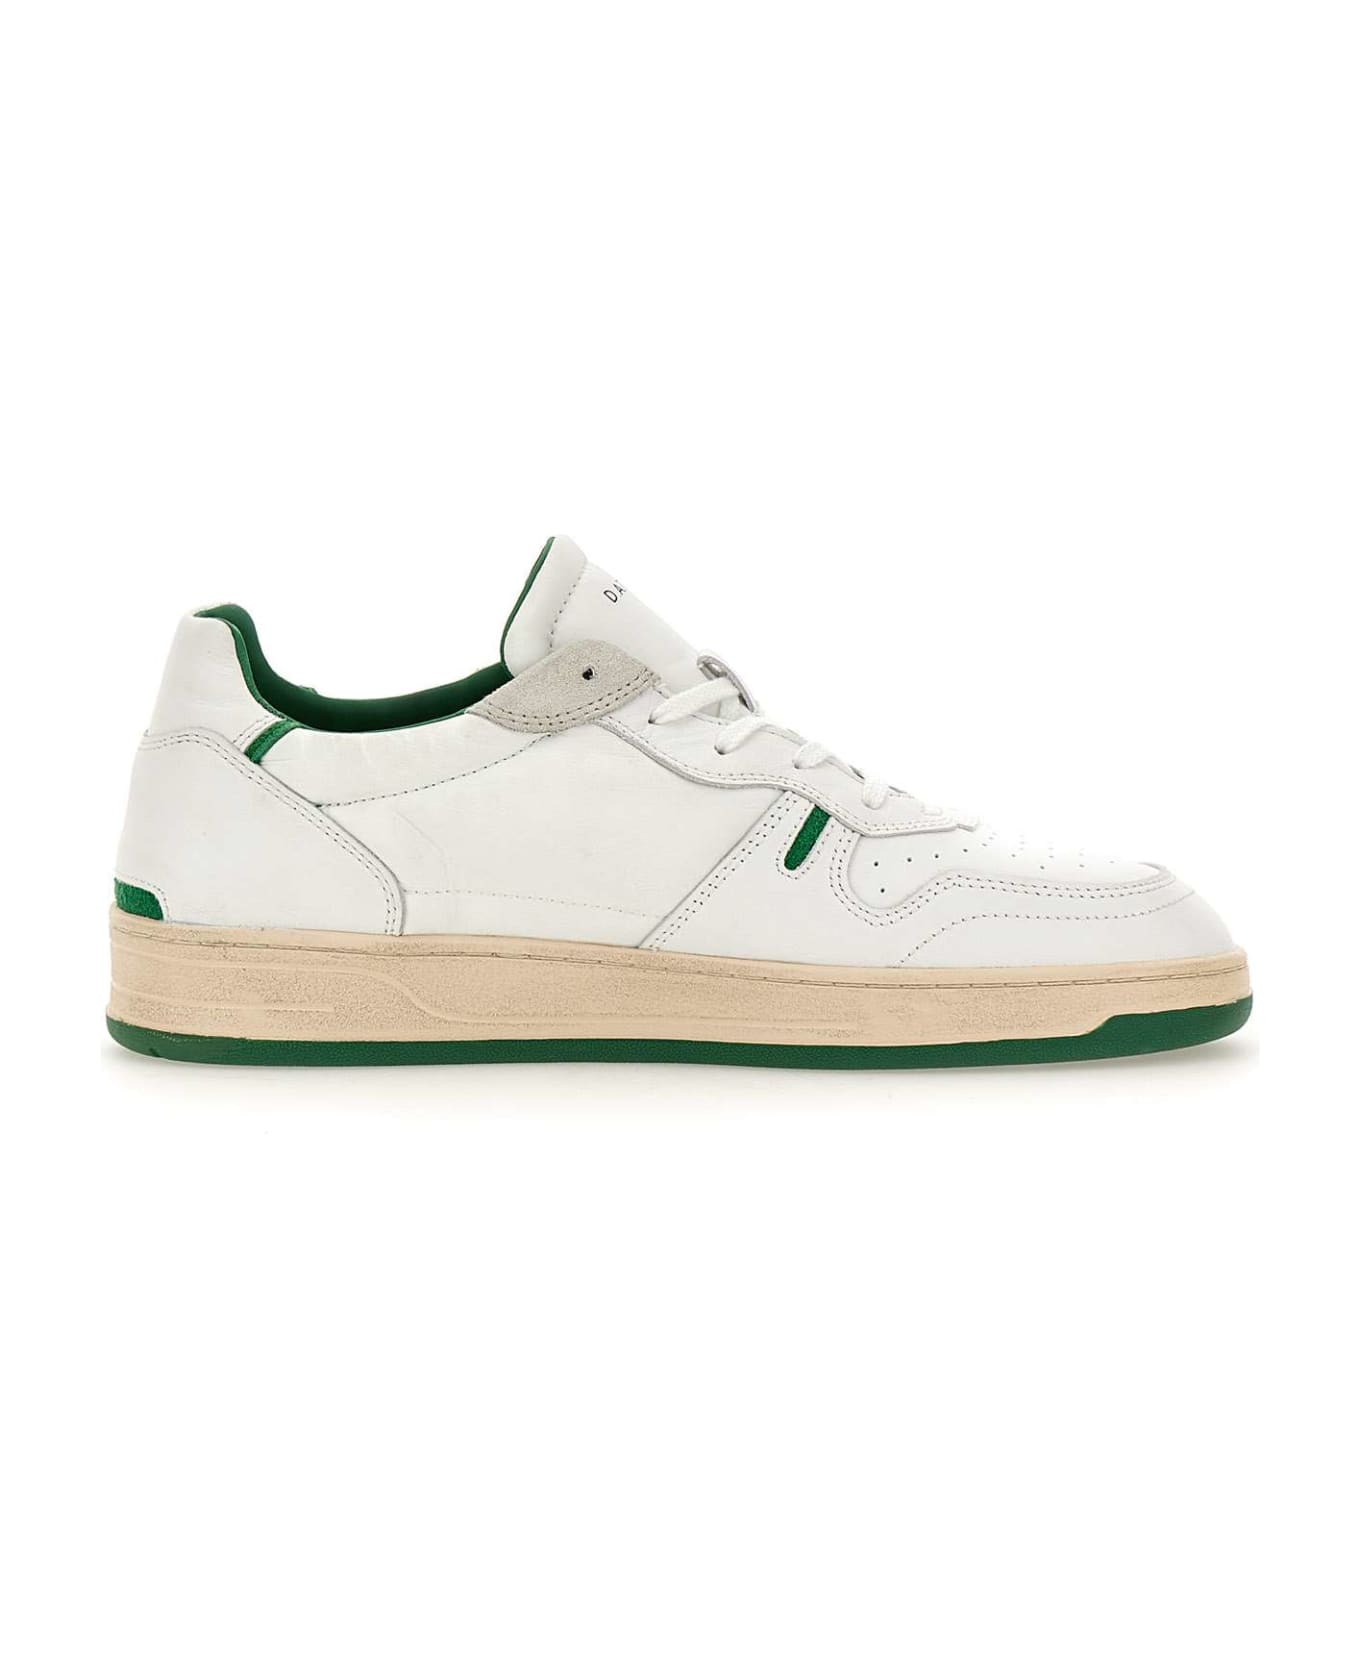 D.A.T.E. "court 2.0" Sneakers - WHITE-GREEN スニーカー